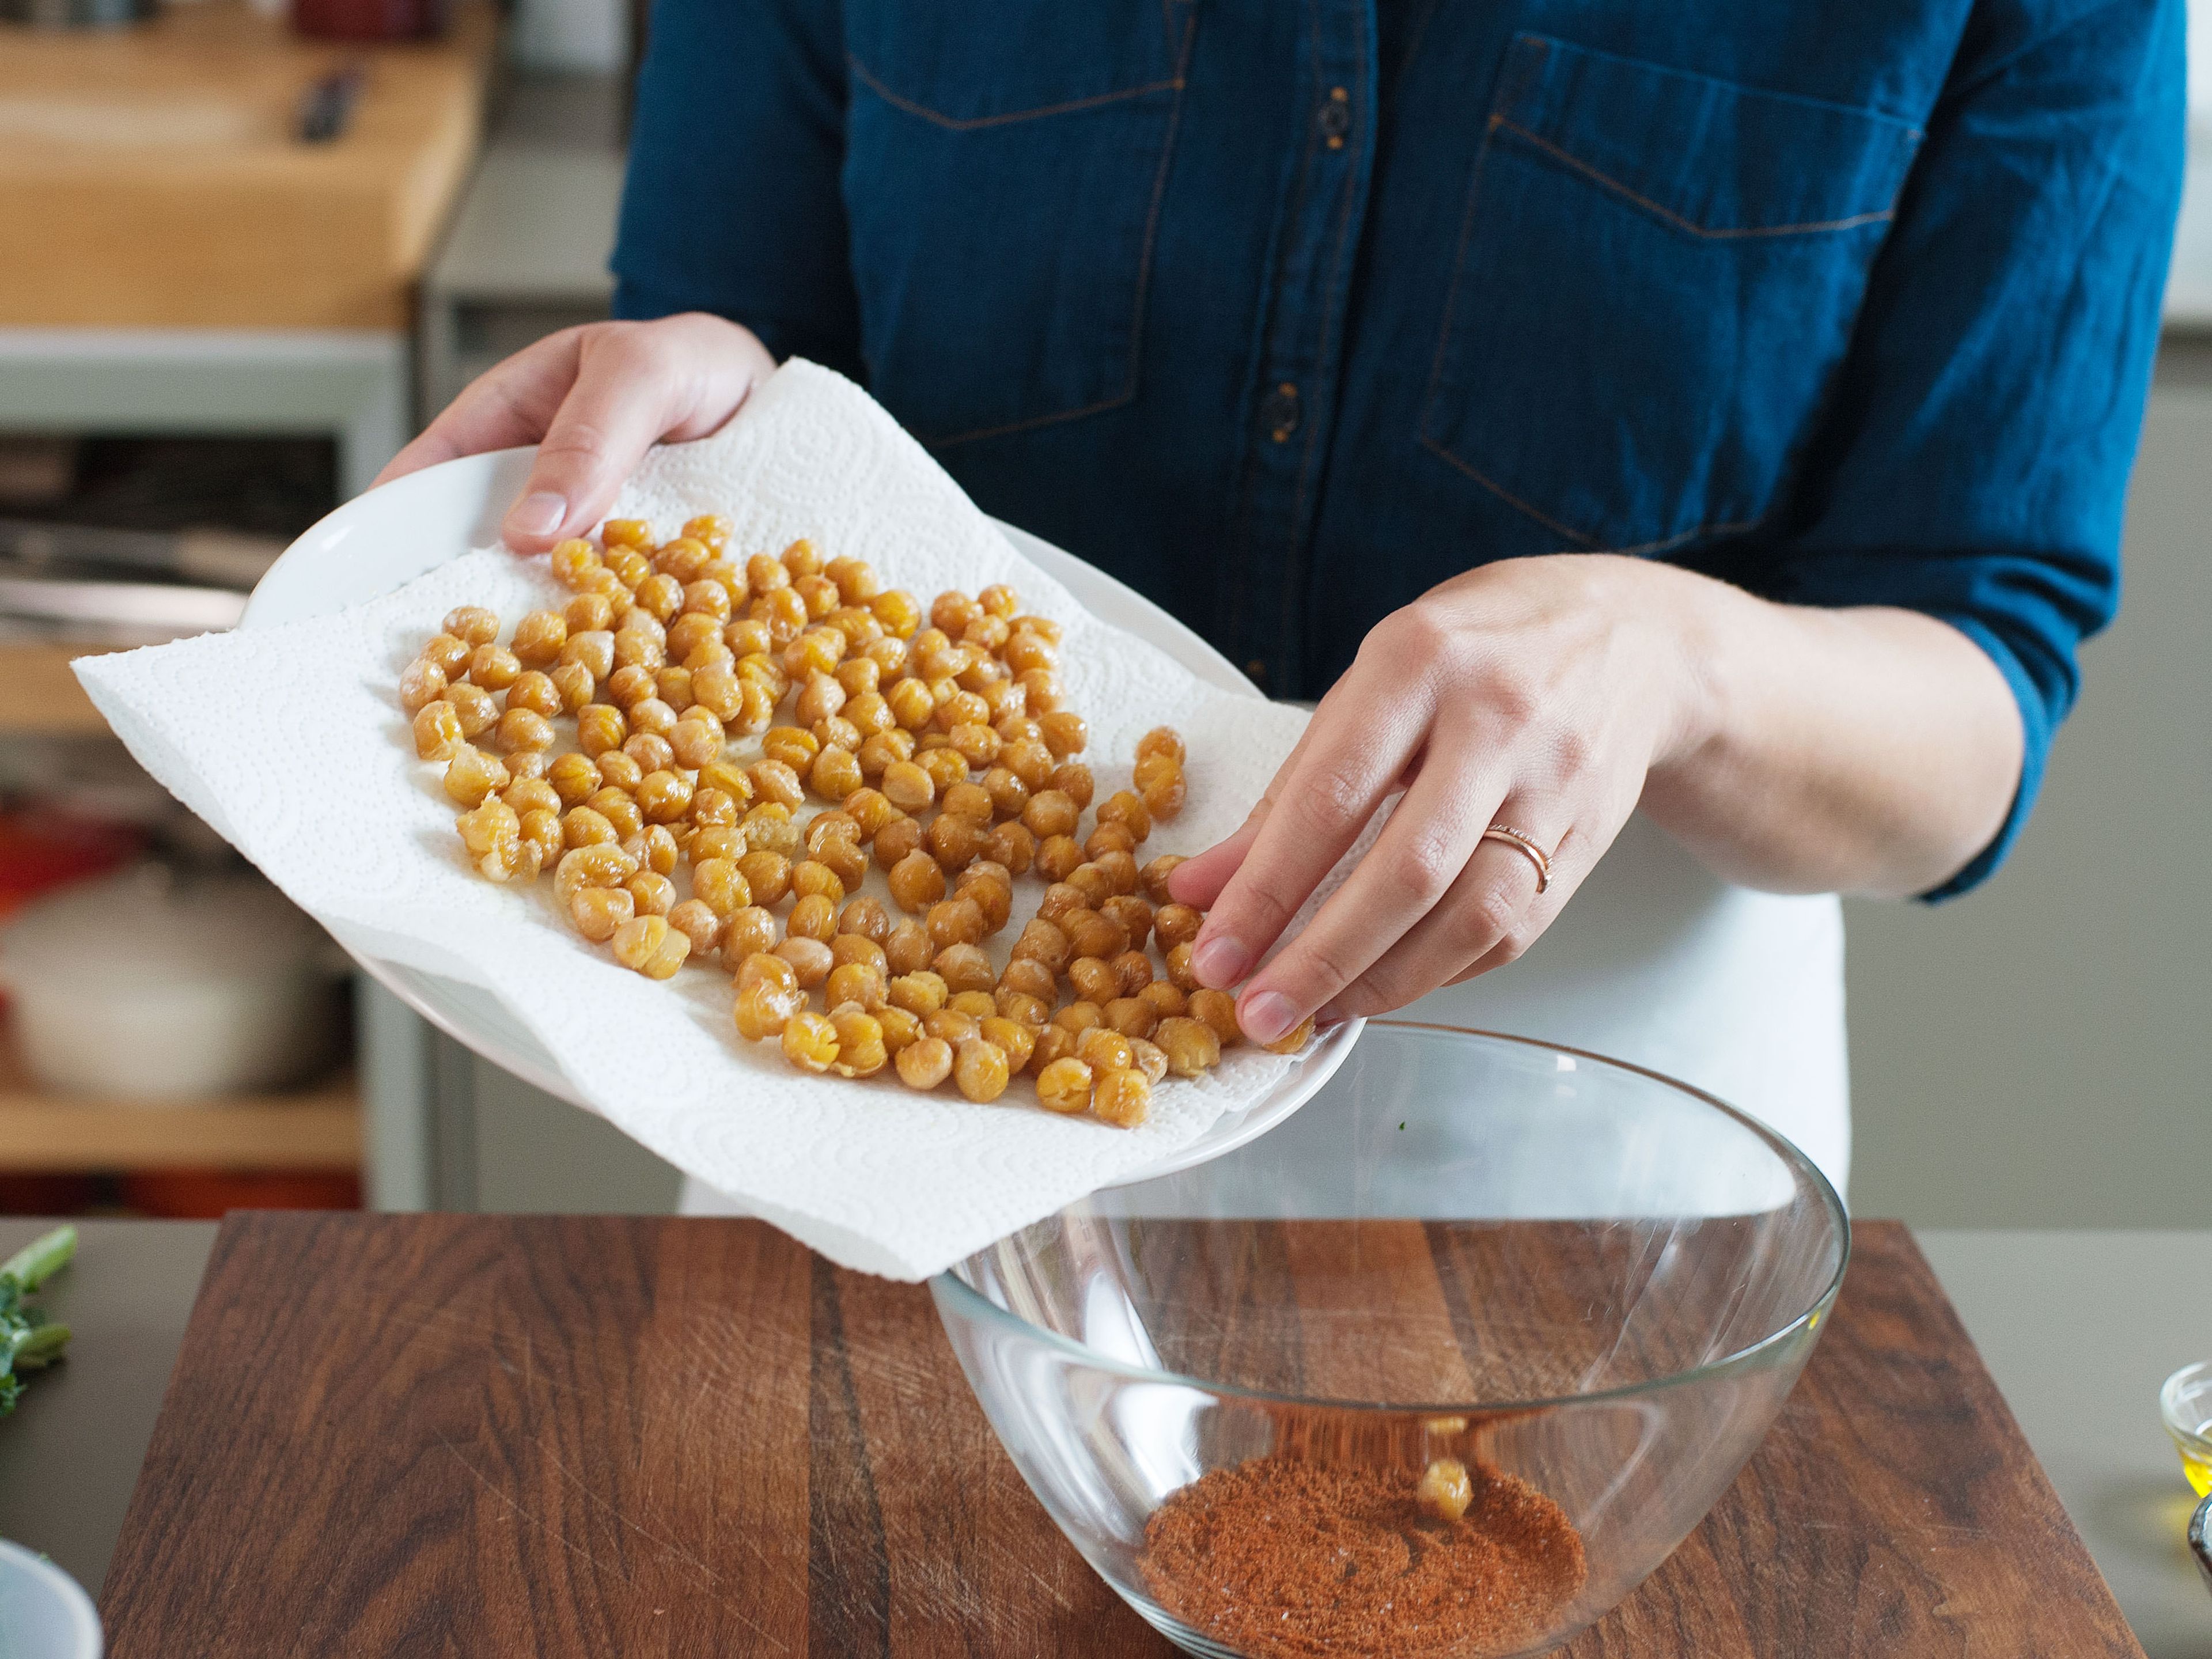 Combine paprika powder, cayenne, coriander, and salt in a mixing bowl. Add fried chickpeas and toss to combine. Season with salt and pepper. Set aside.